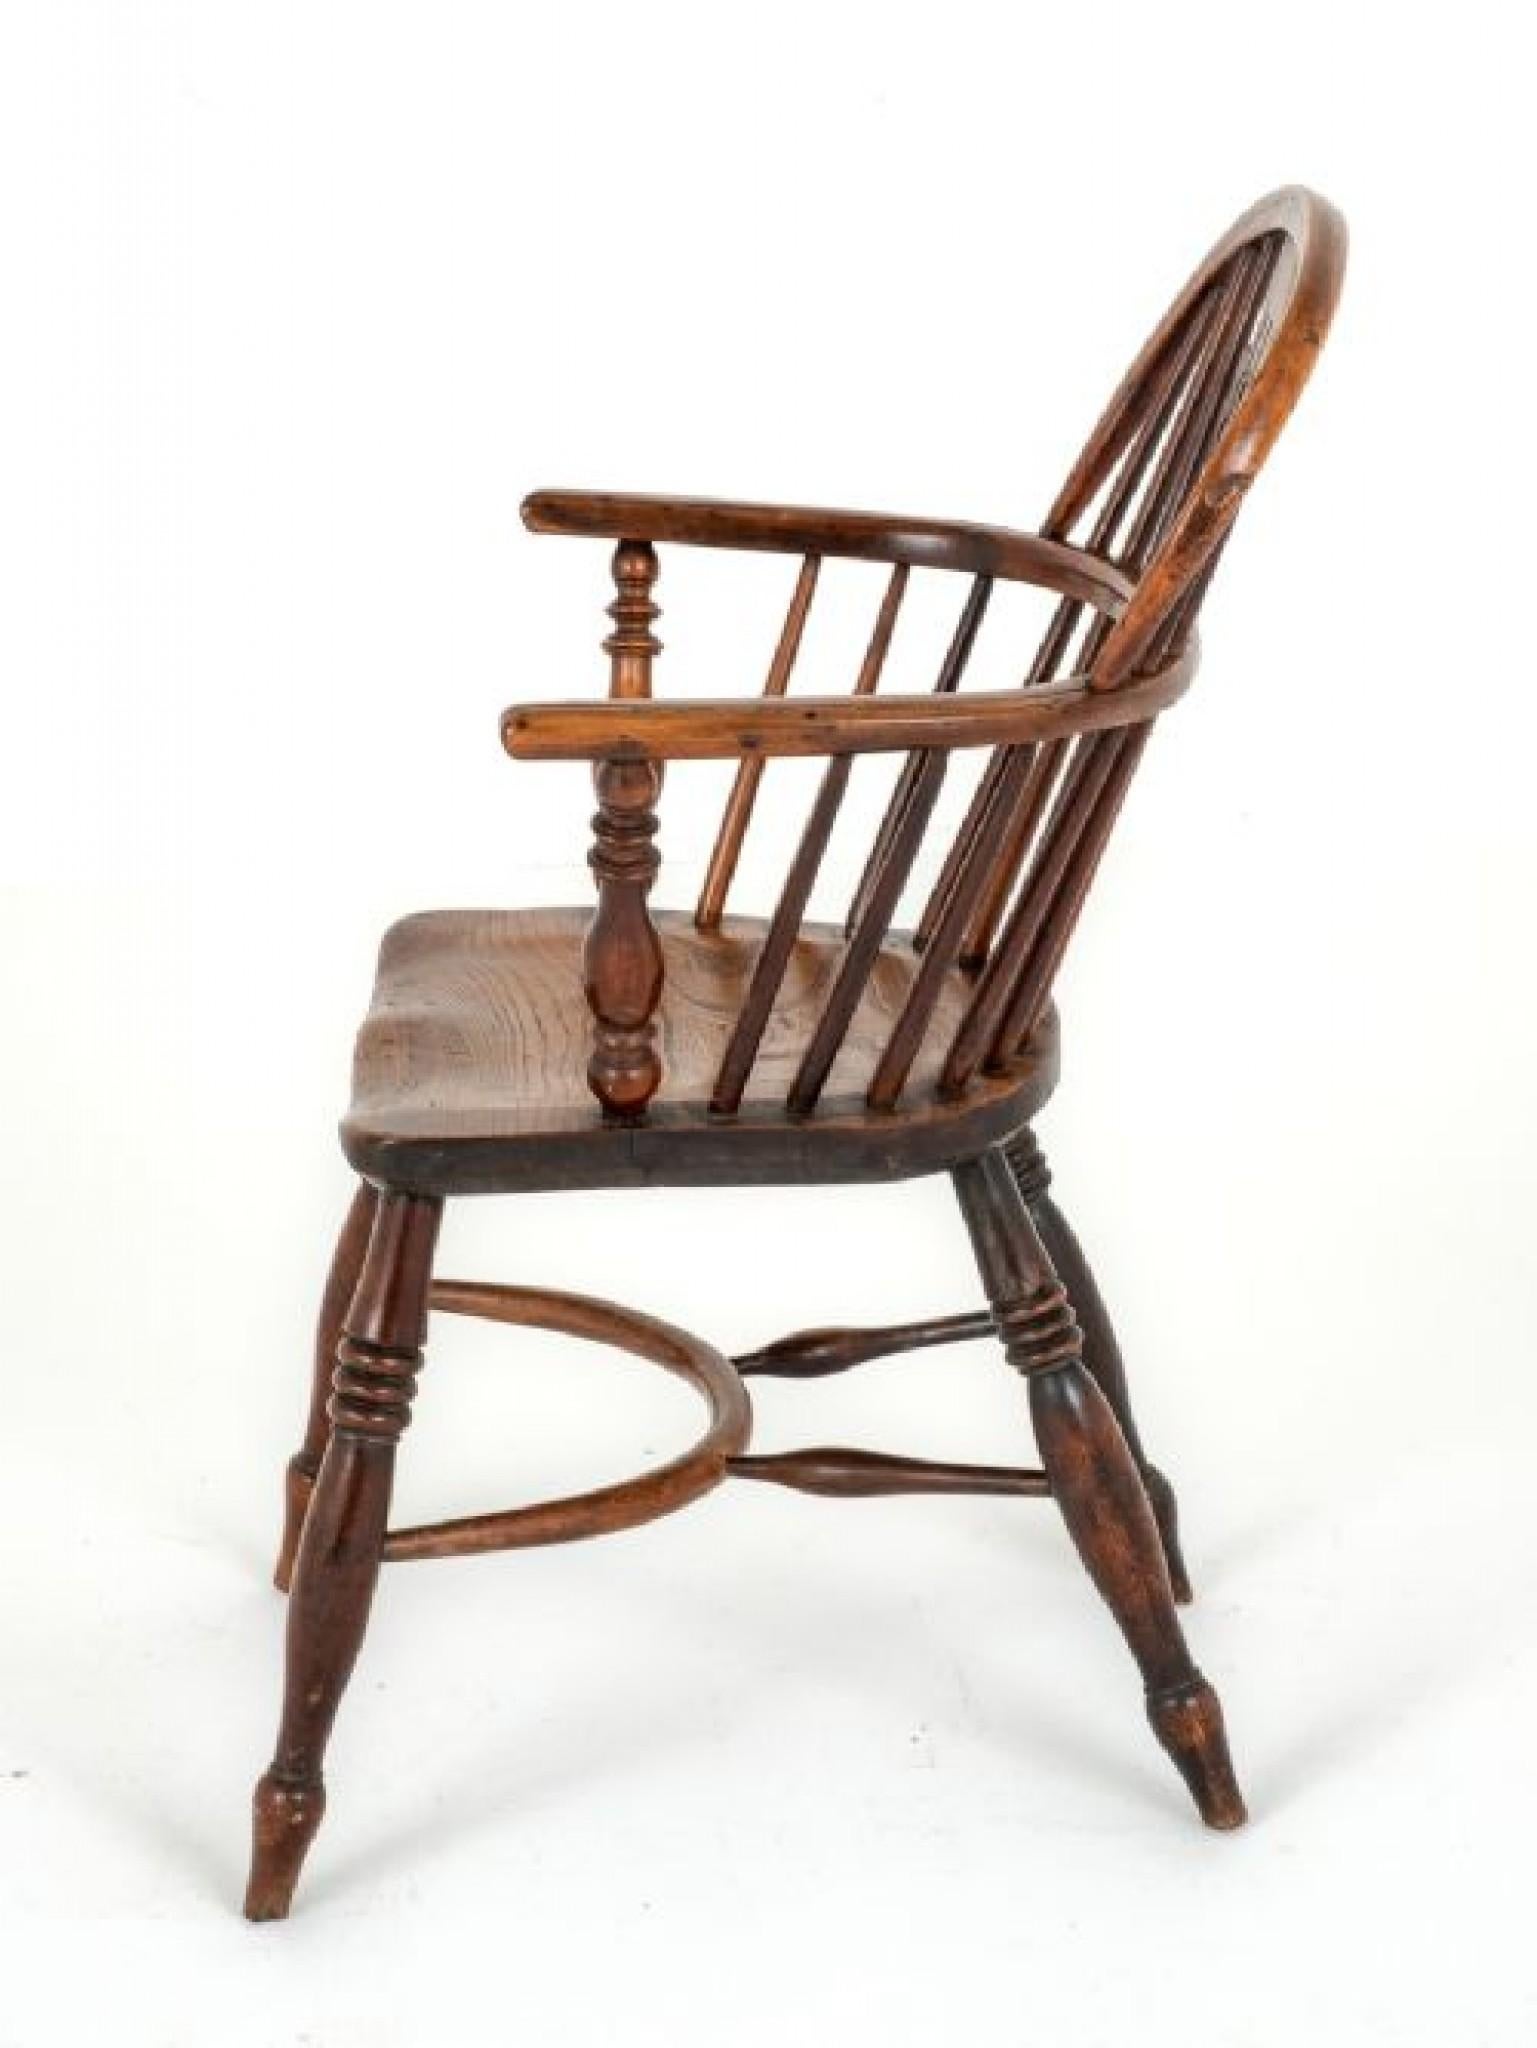 Georgian Windsor Chair.
This Chair is Made from Elm and Yew Wood.
Circa 1800
Standing upon Ring Turned Legs with a Crinoline Stretcher.
The Arm Supports Being of a Turned Form.
The Chair Features a Pierced and Shaped Back Splat.